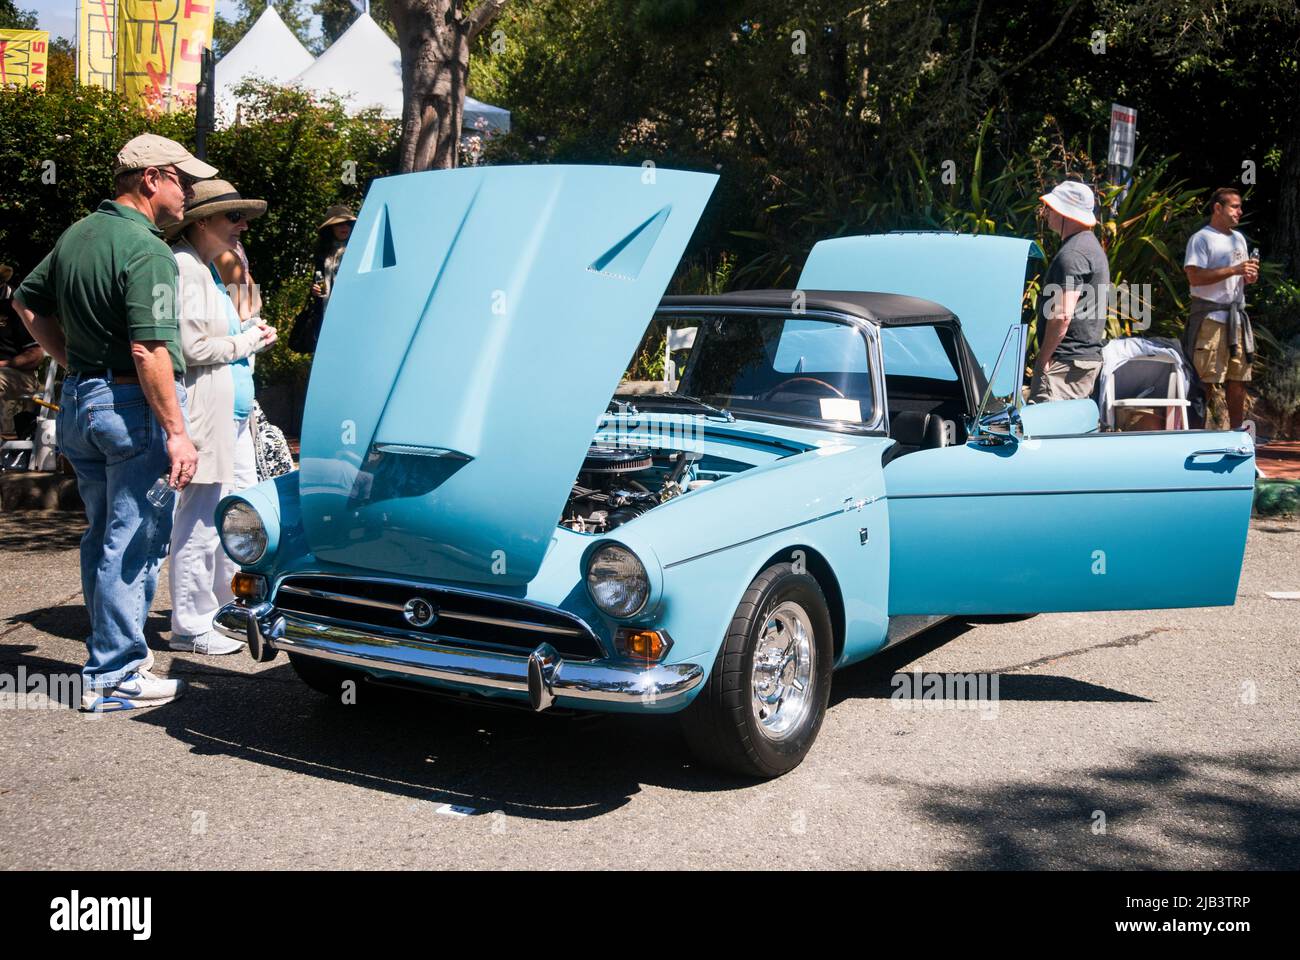 Spectators enjoy classic cars in downtown Carmel, seen at the Carmel-by-the-Sea Concours on the Avenue event during Monterey Car Week Stock Photo